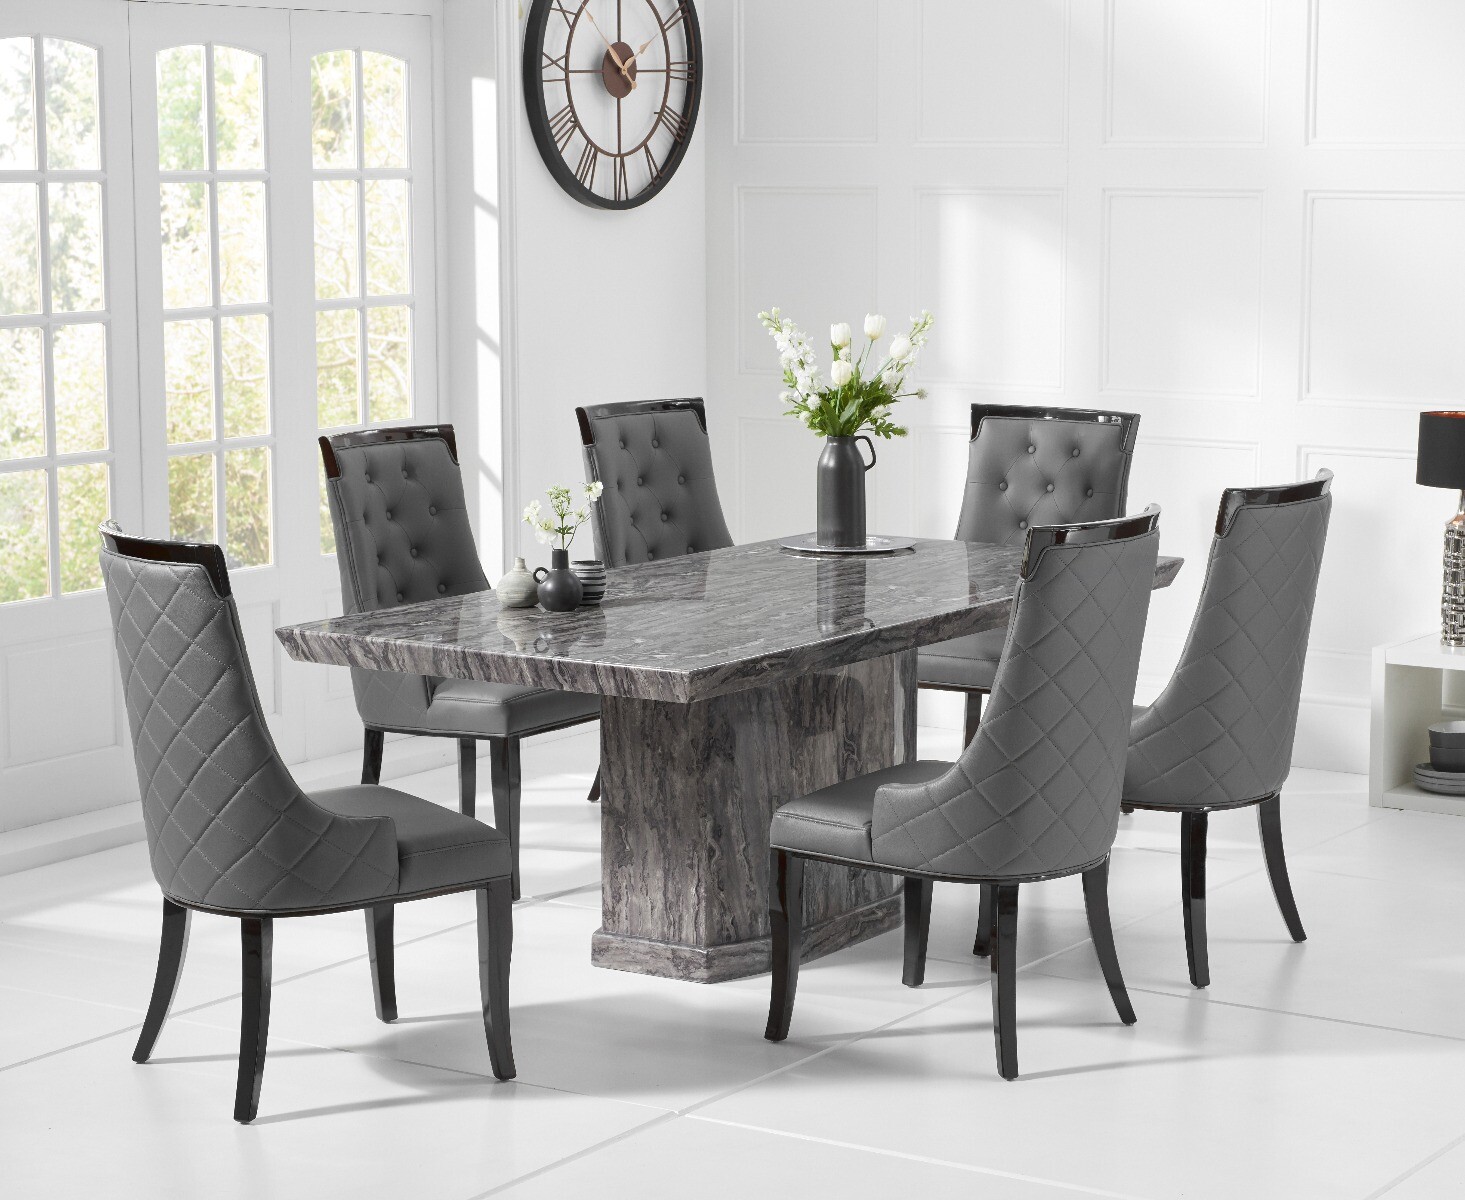 Carvelle 200cm Grey Pedestal Marble Dining Table With 6 Grey Francesca Chairs